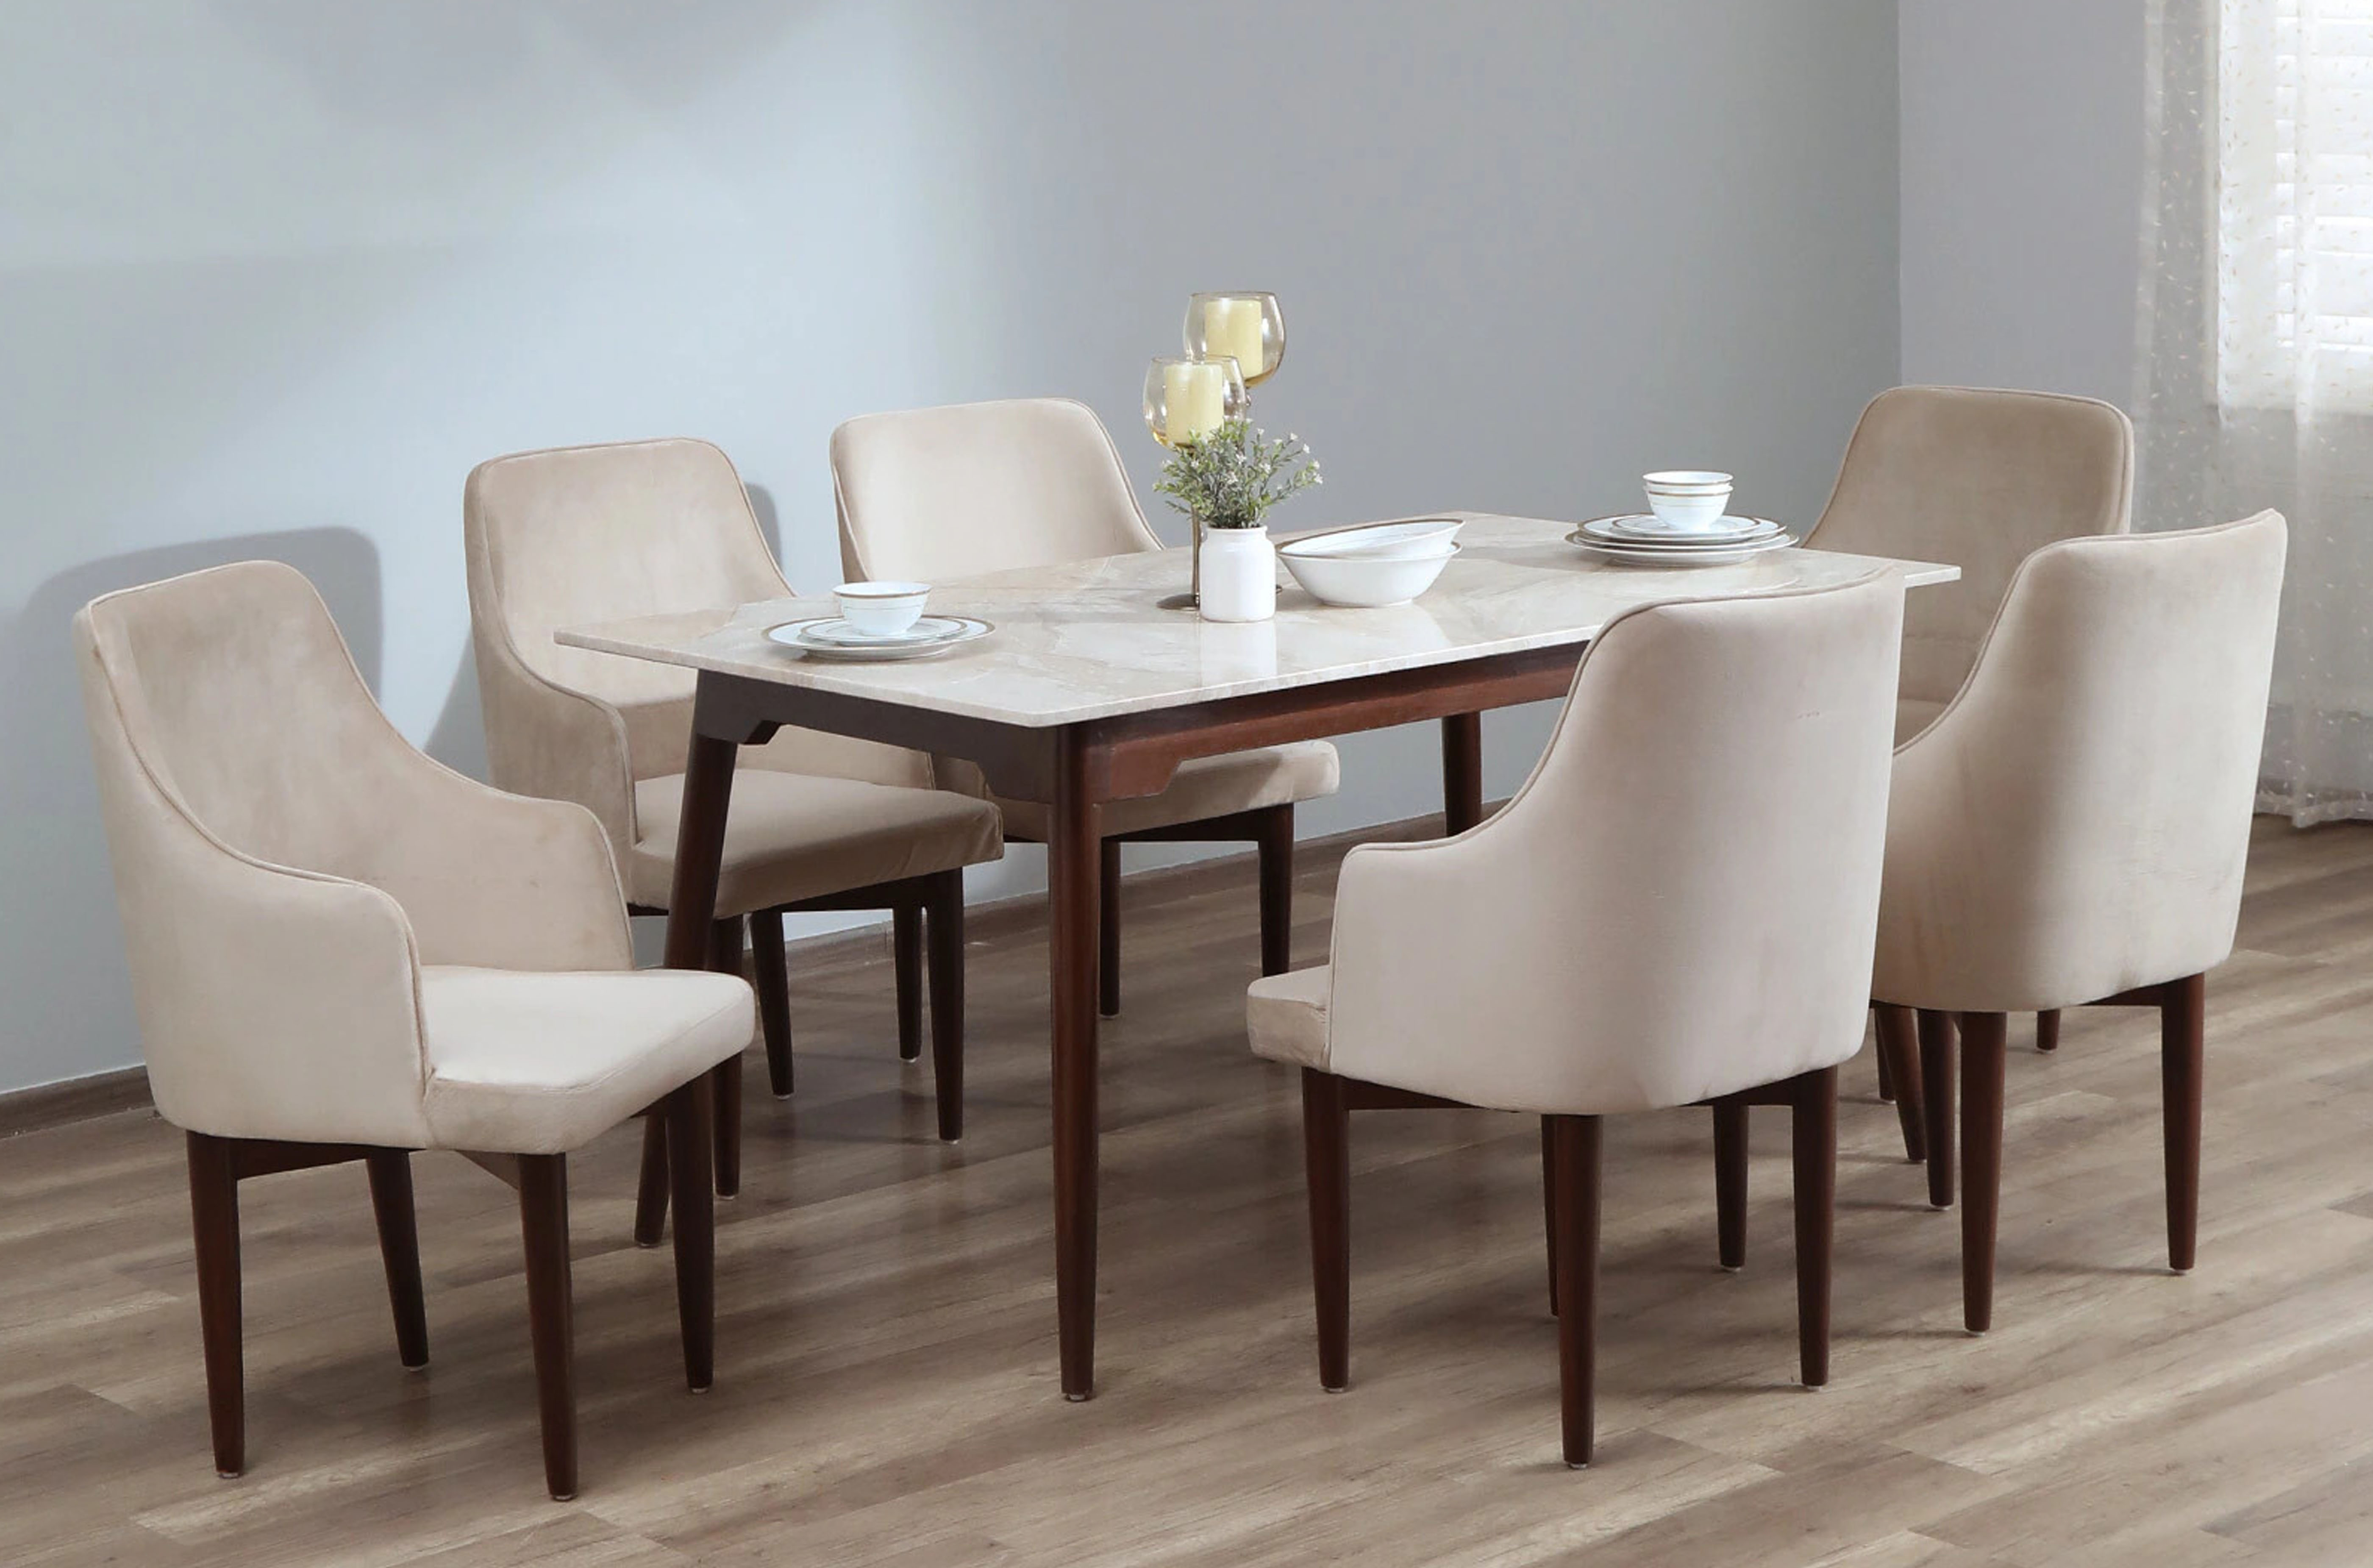 Drone 6 seater dining table